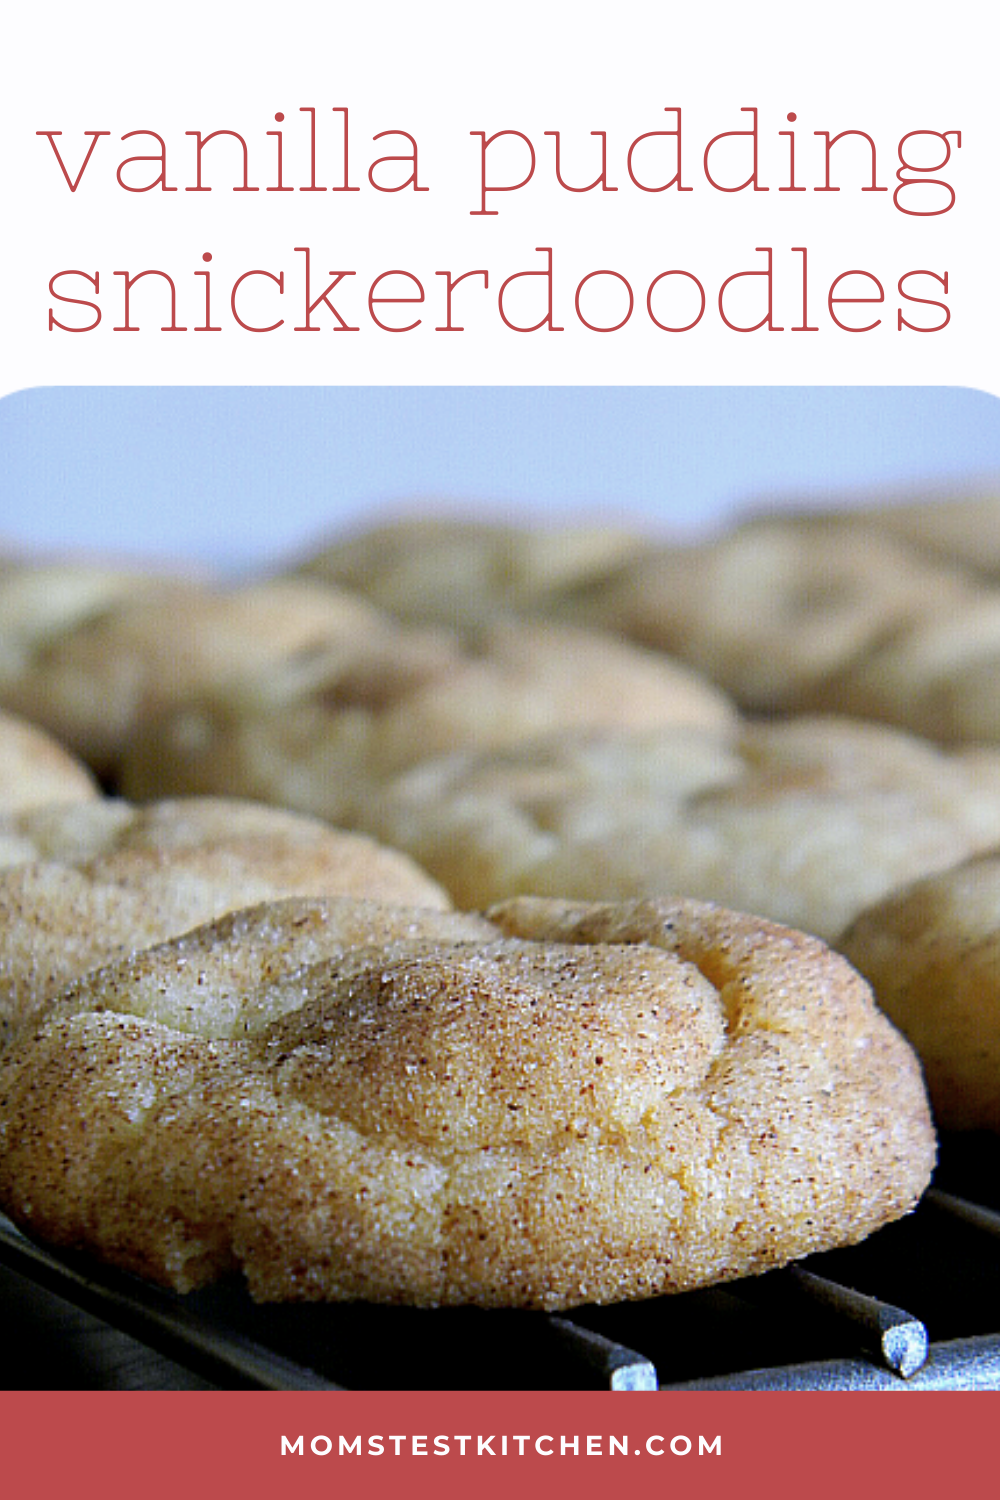 Simple snickerdoodles are taken to a whole new level with the addition of vanilla pudding to make these delicious Vanilla Pudding Snickerdoodles